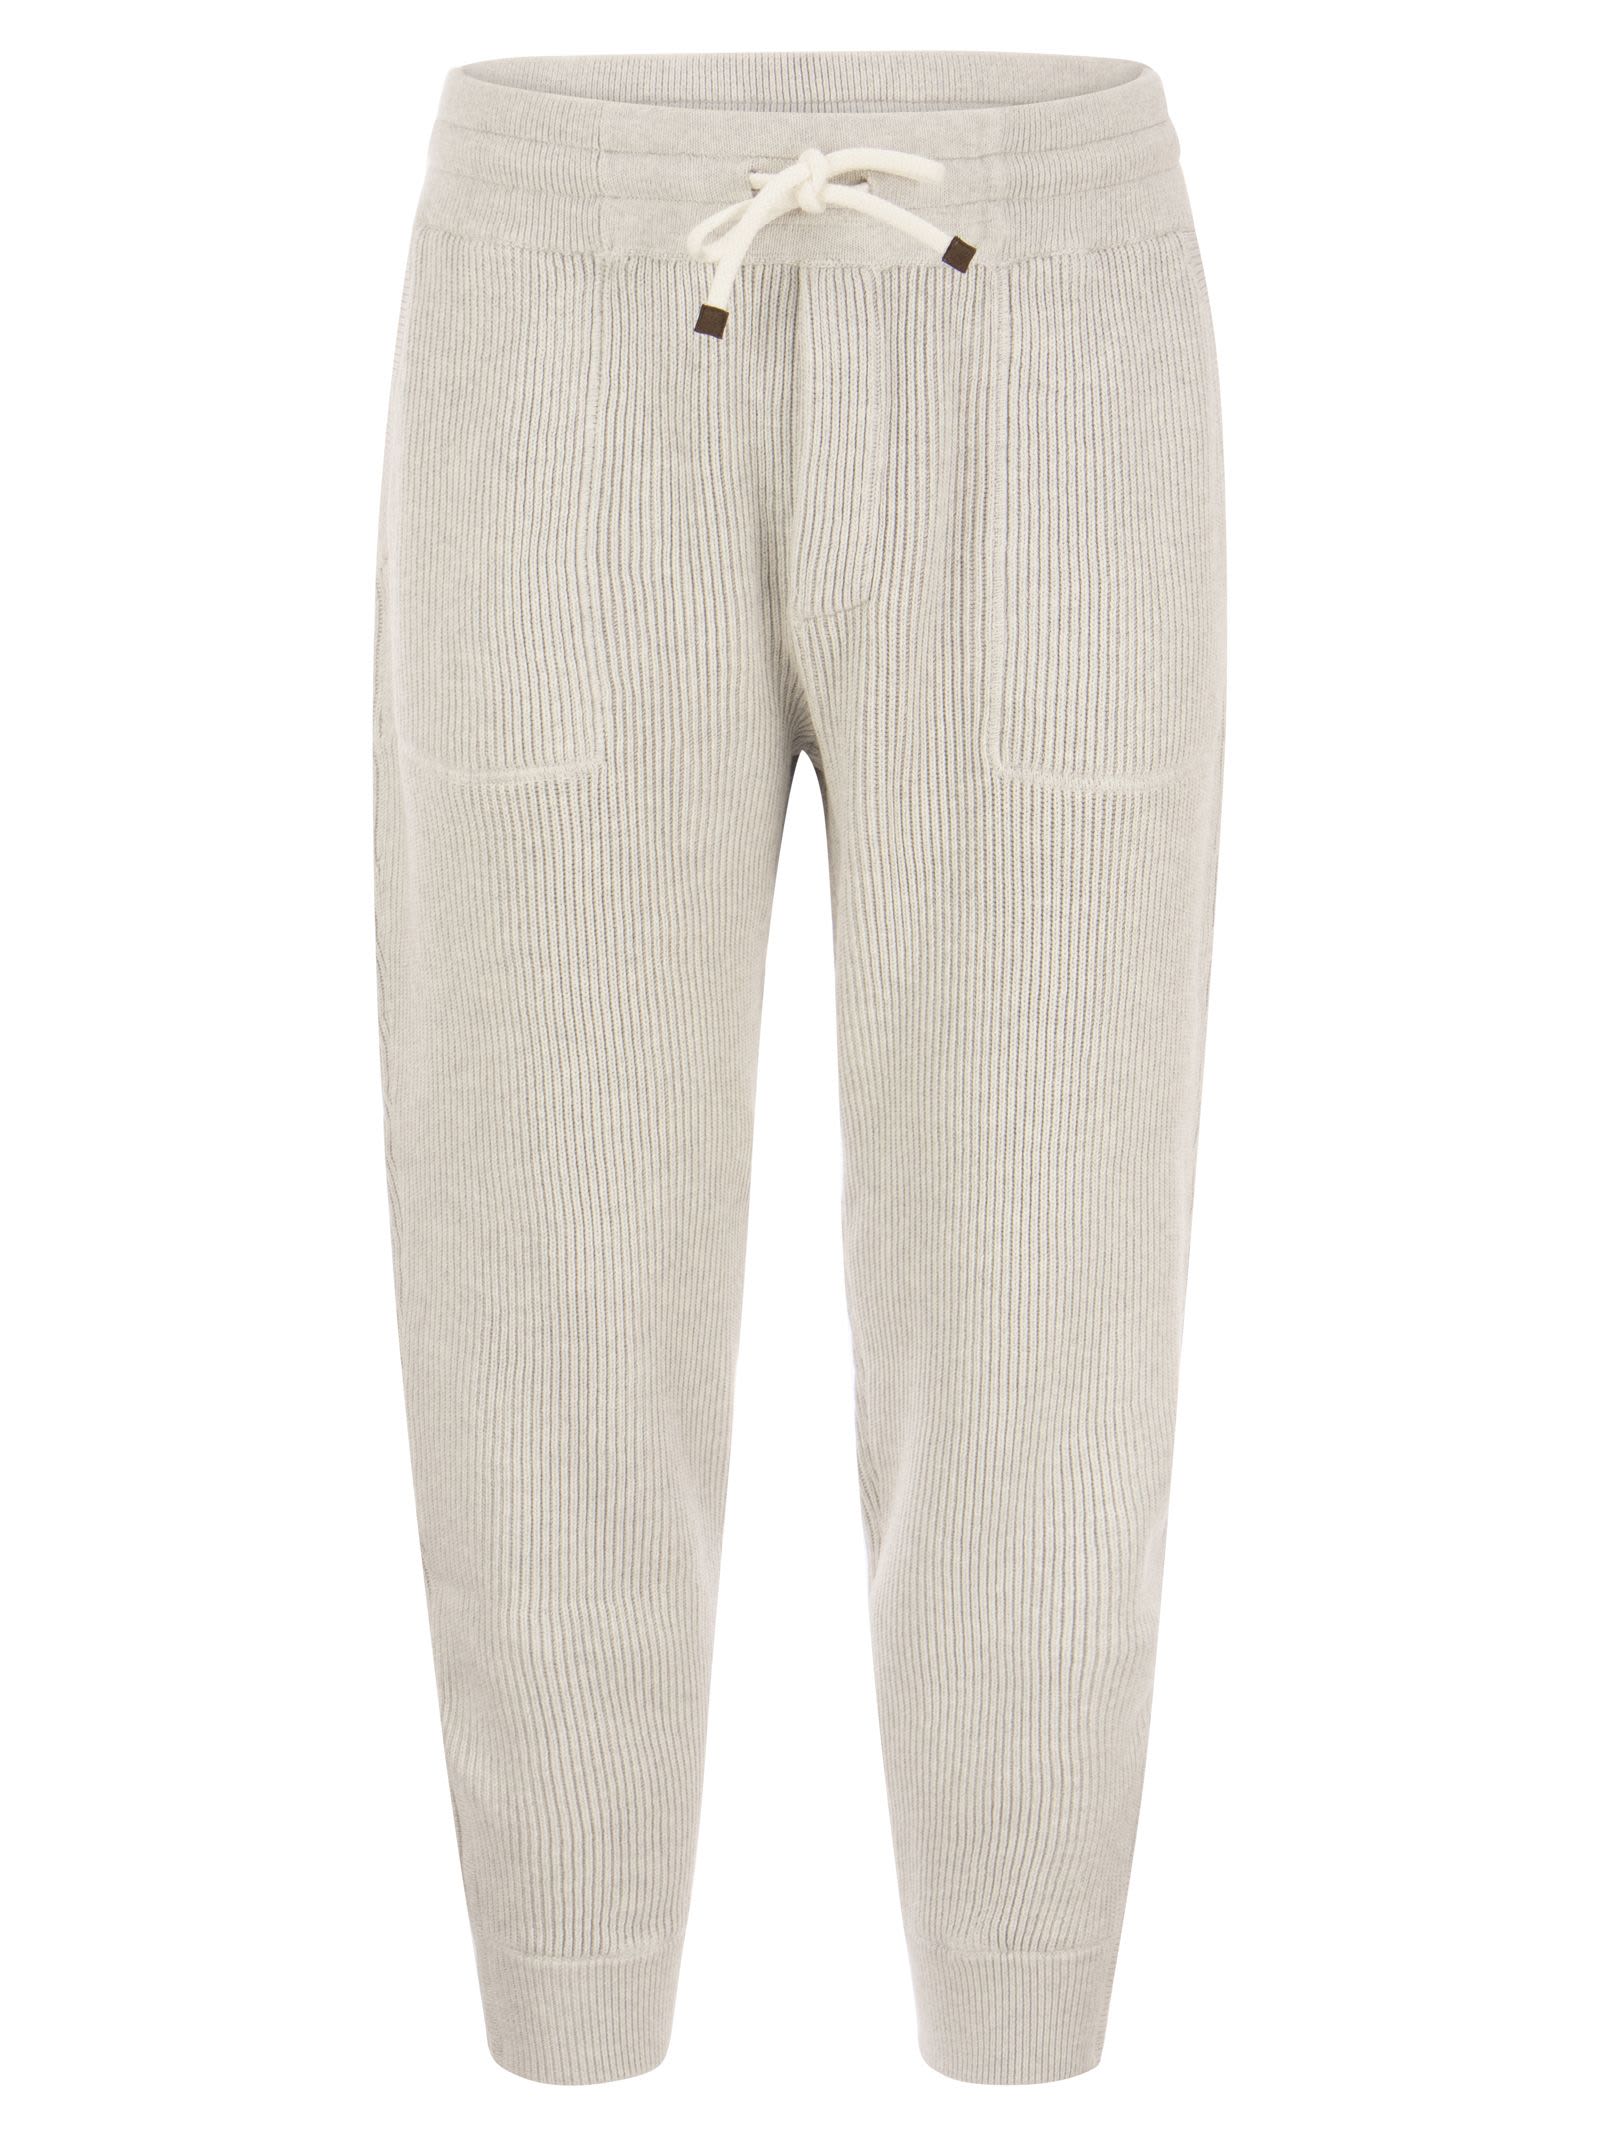 BRUNELLO CUCINELLI COTTON RIB KNIT JOGGERS WITH DRAWSTRING AND BOTTOM ZIP